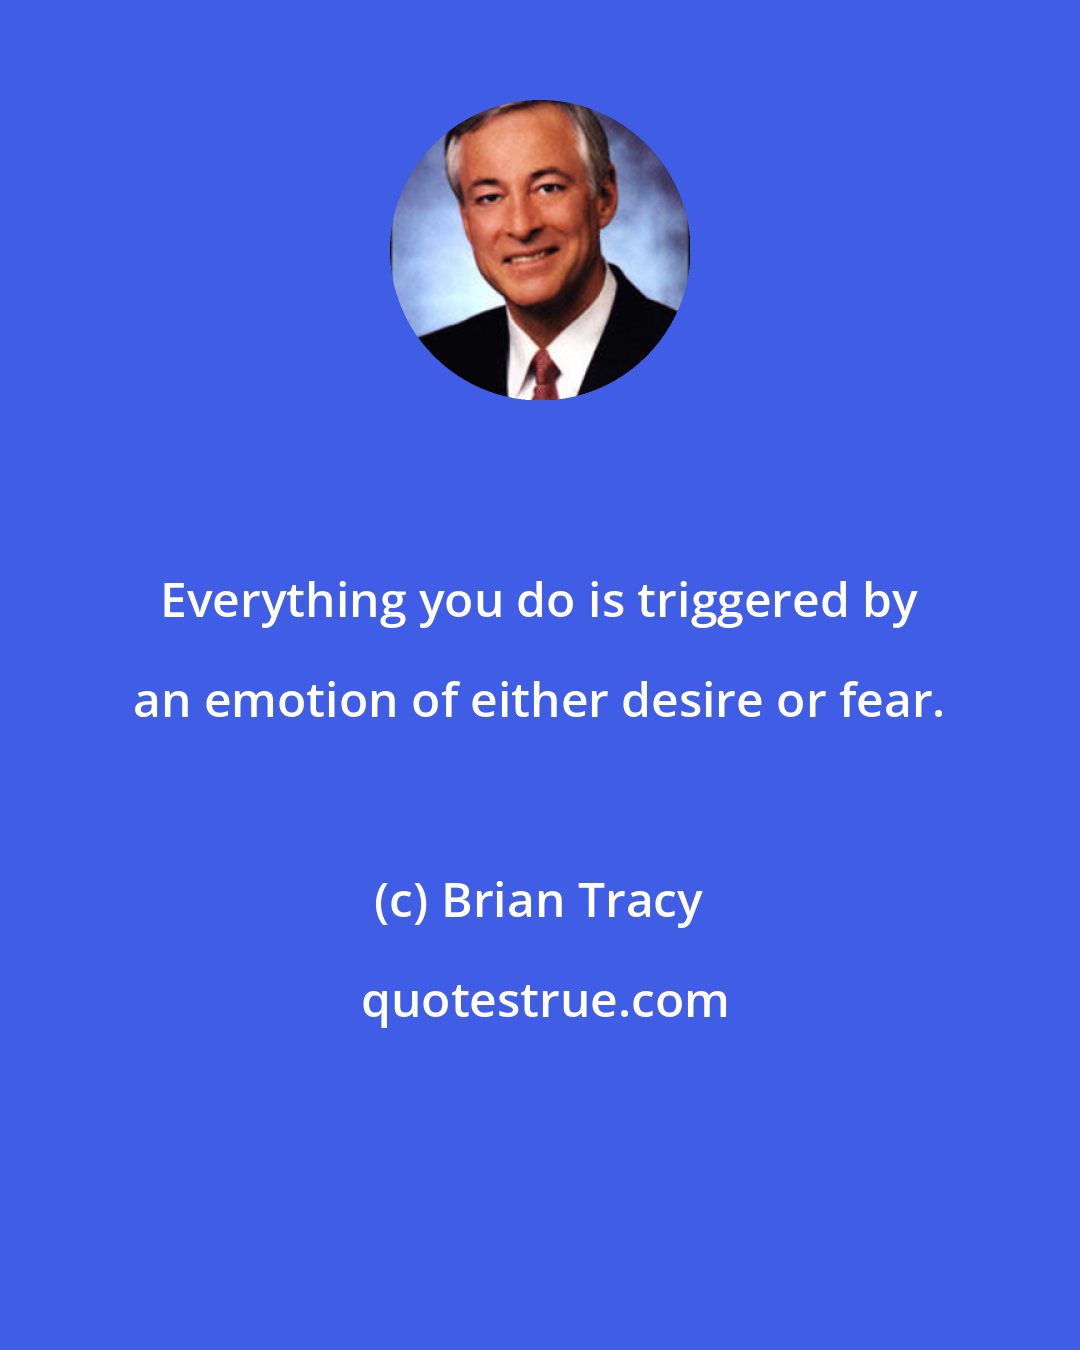 Brian Tracy: Everything you do is triggered by an emotion of either desire or fear.